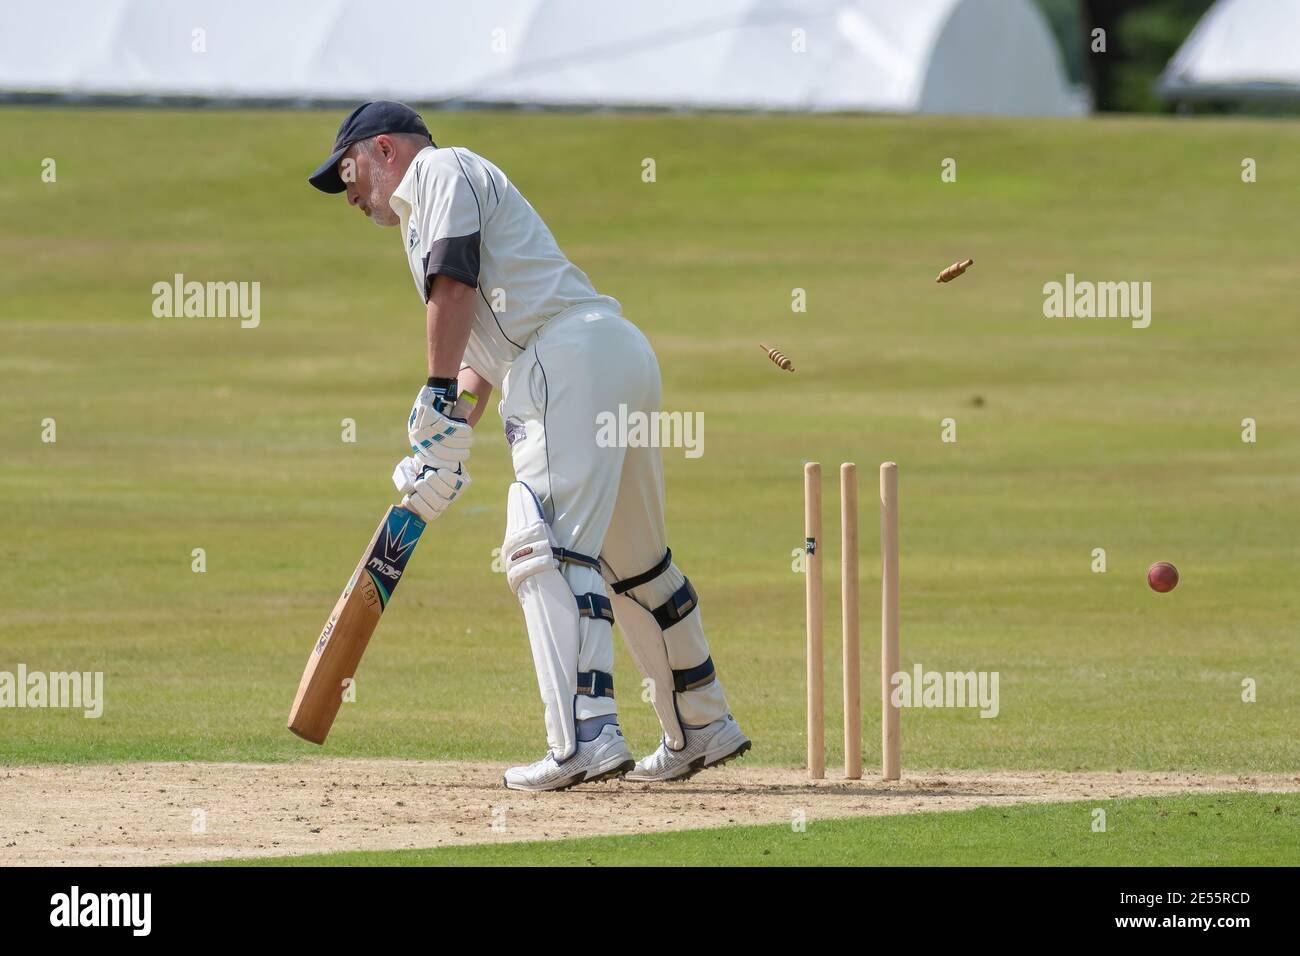 Bowled. Bales fly off the stumps as the cricket ball passes out of shot, at an amateur cricket match in Perth, Scotland. Stock Photo